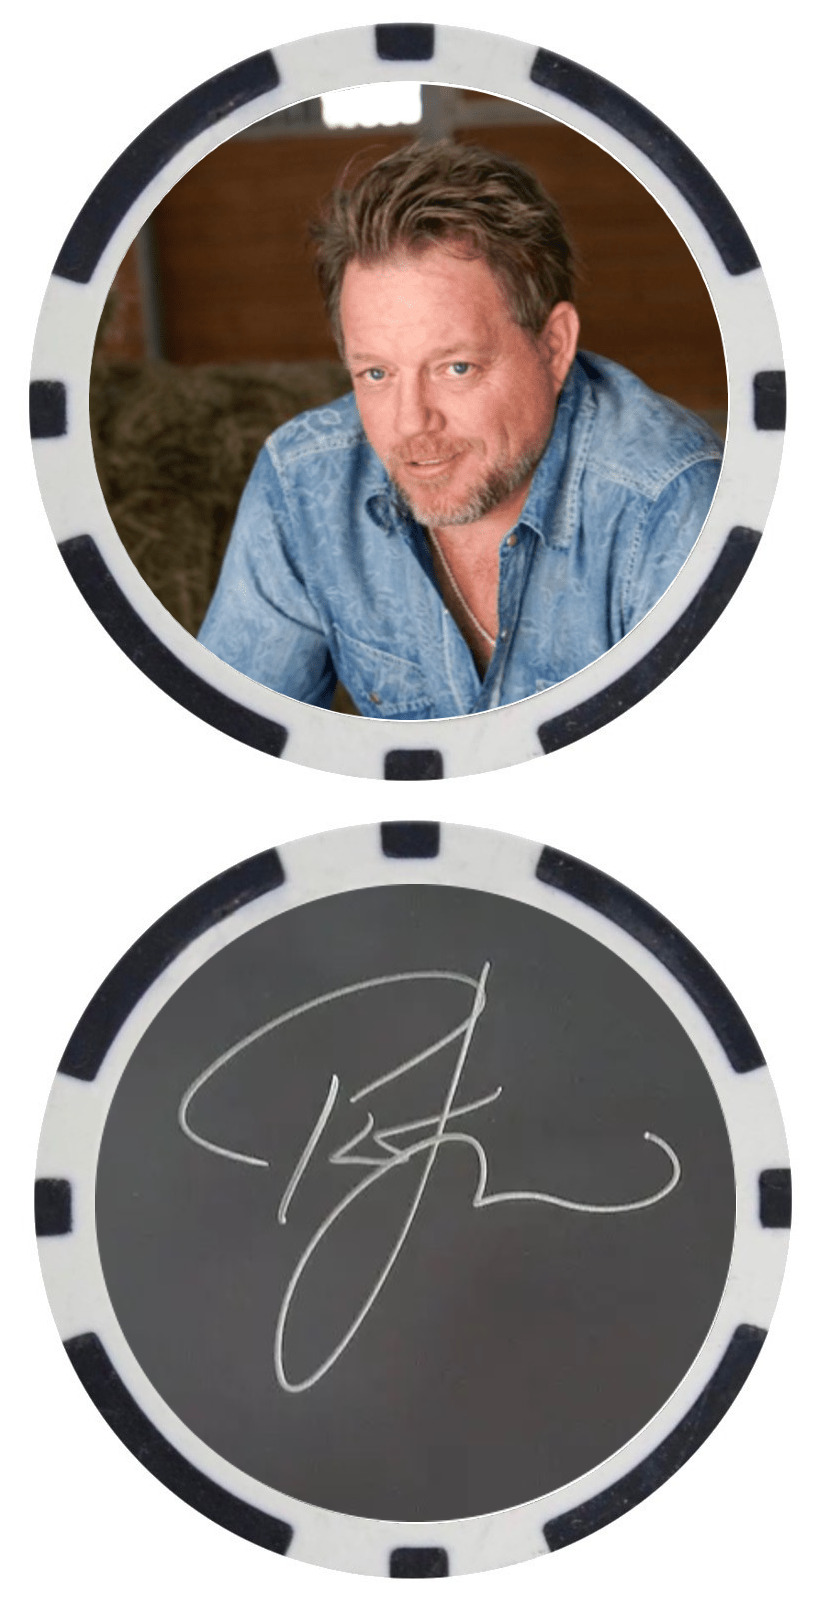 PAT GREEN - COUNTRY STAR - POKER CHIP - ***SIGNED/AUTO***